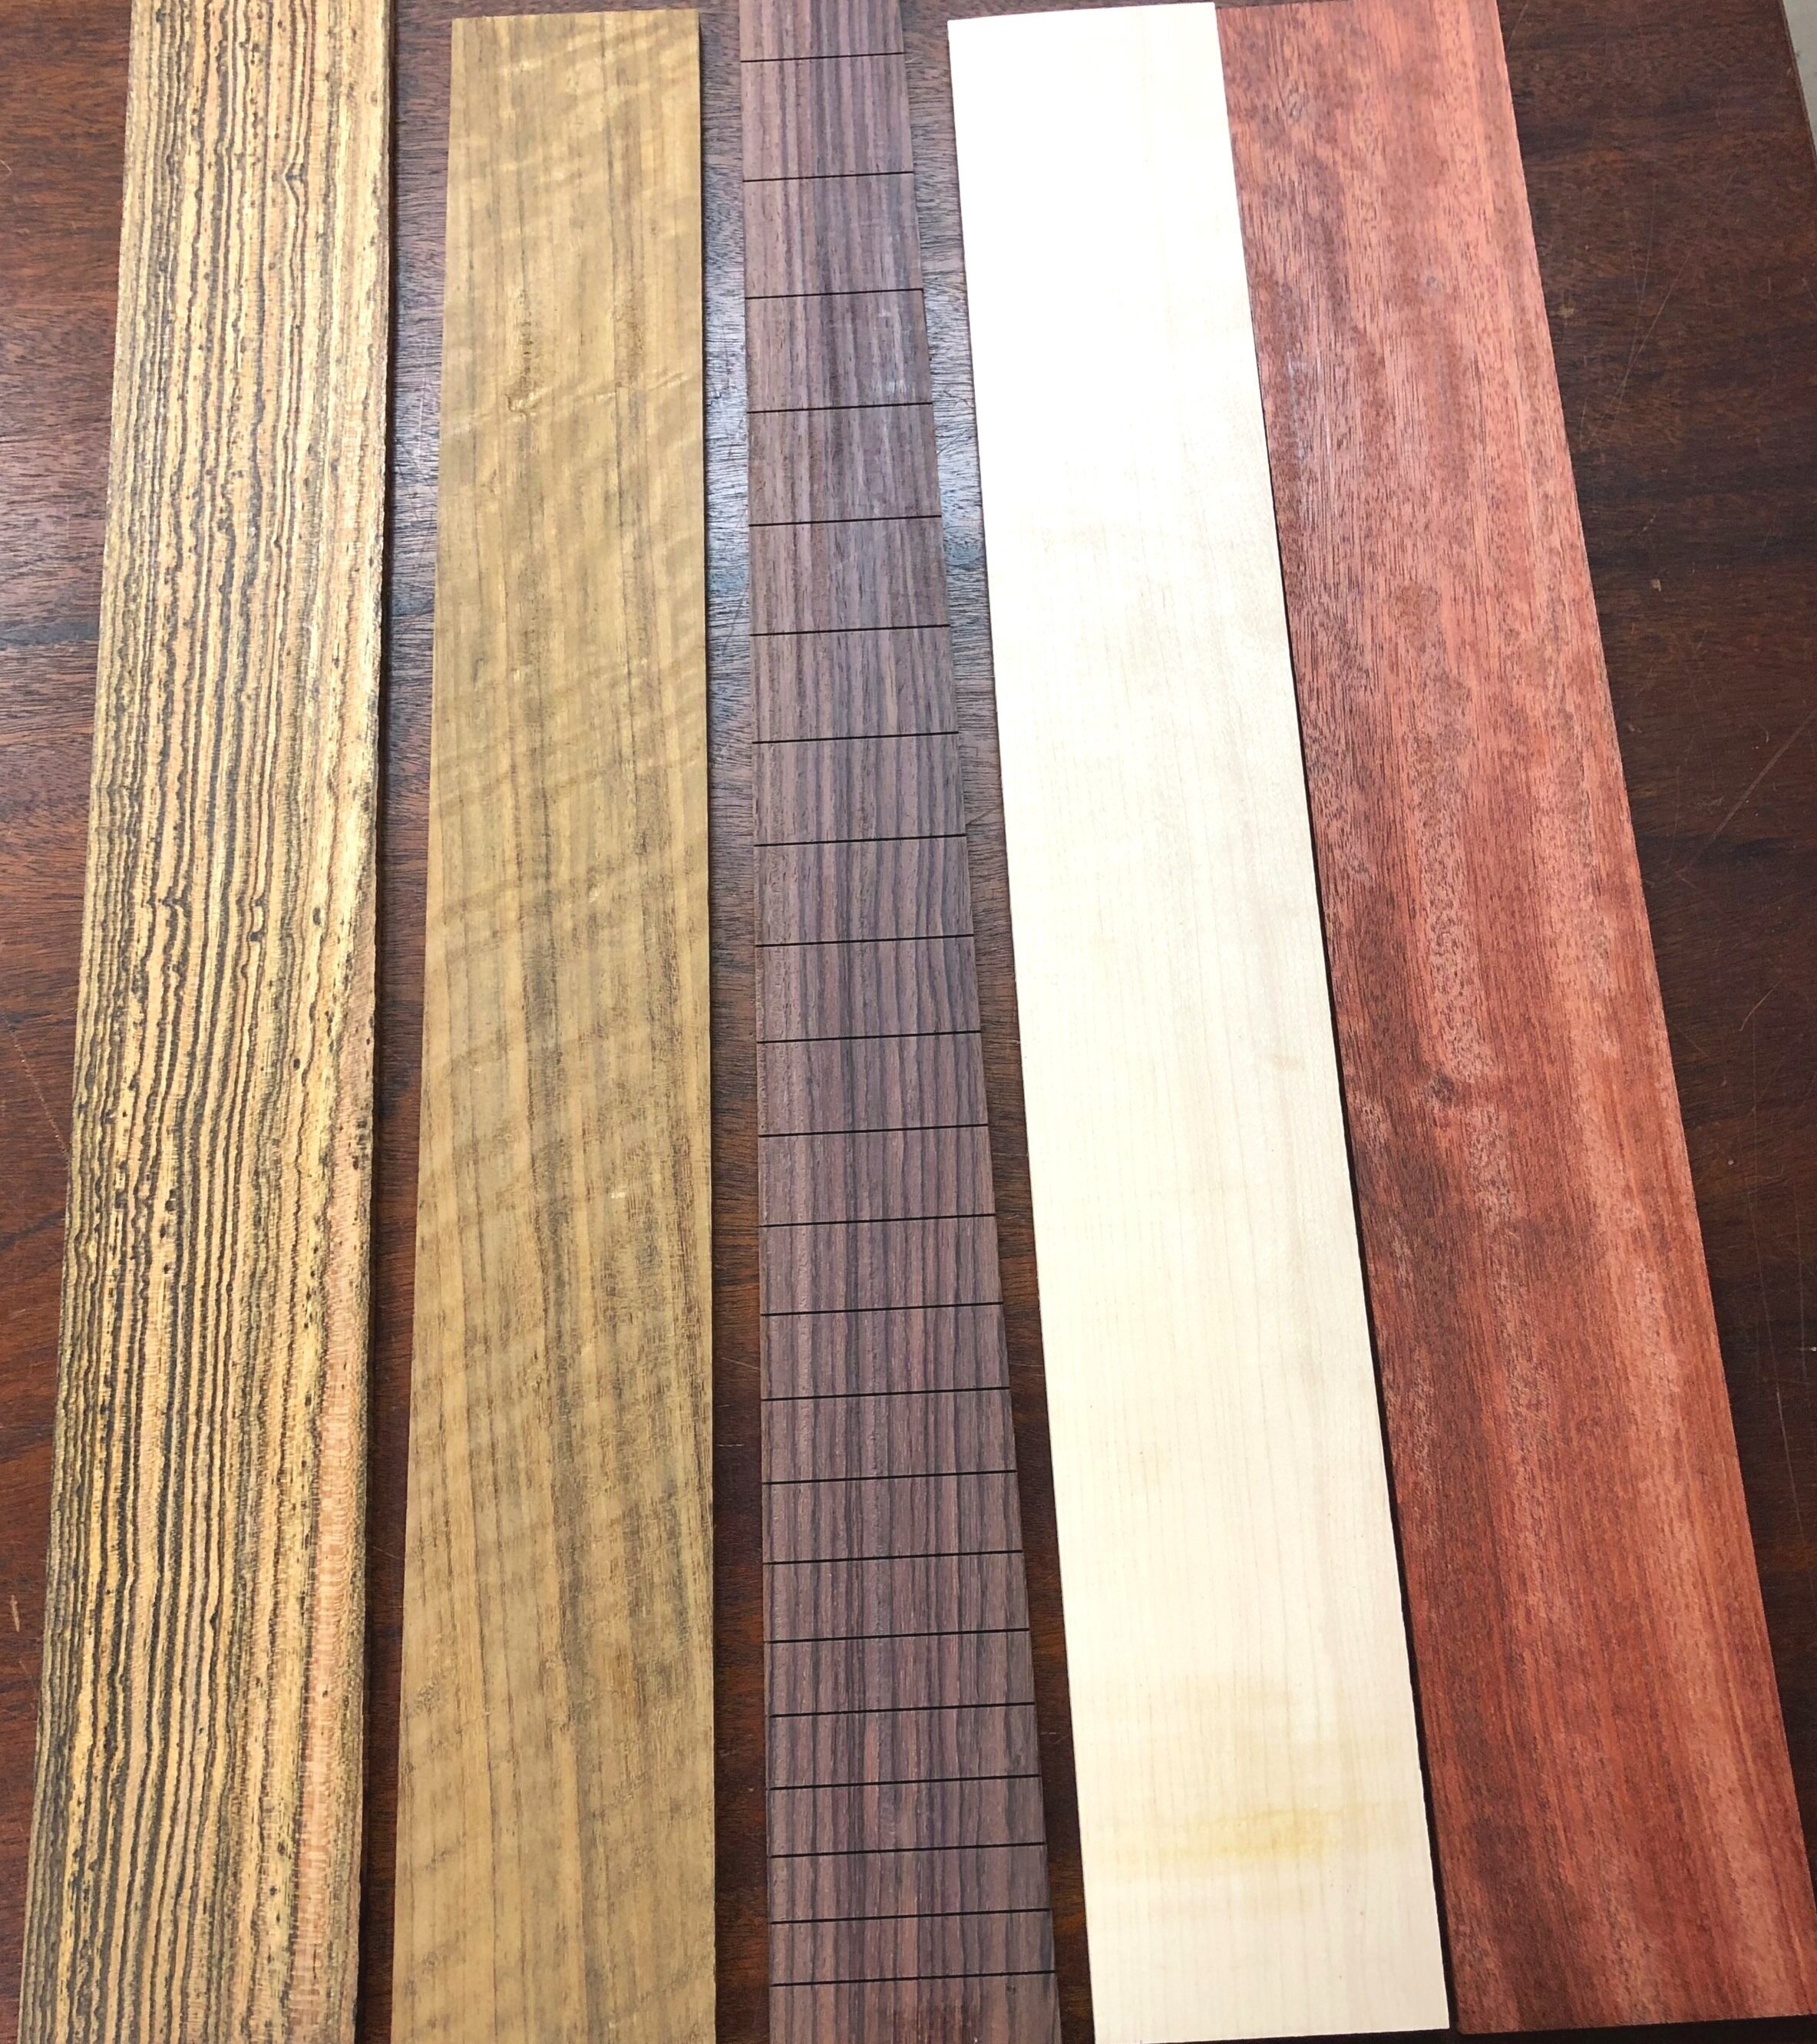 7 Species Fingerboard Blanks FREE SHIPPING IN USA PLEASE SEE PICTURES. 